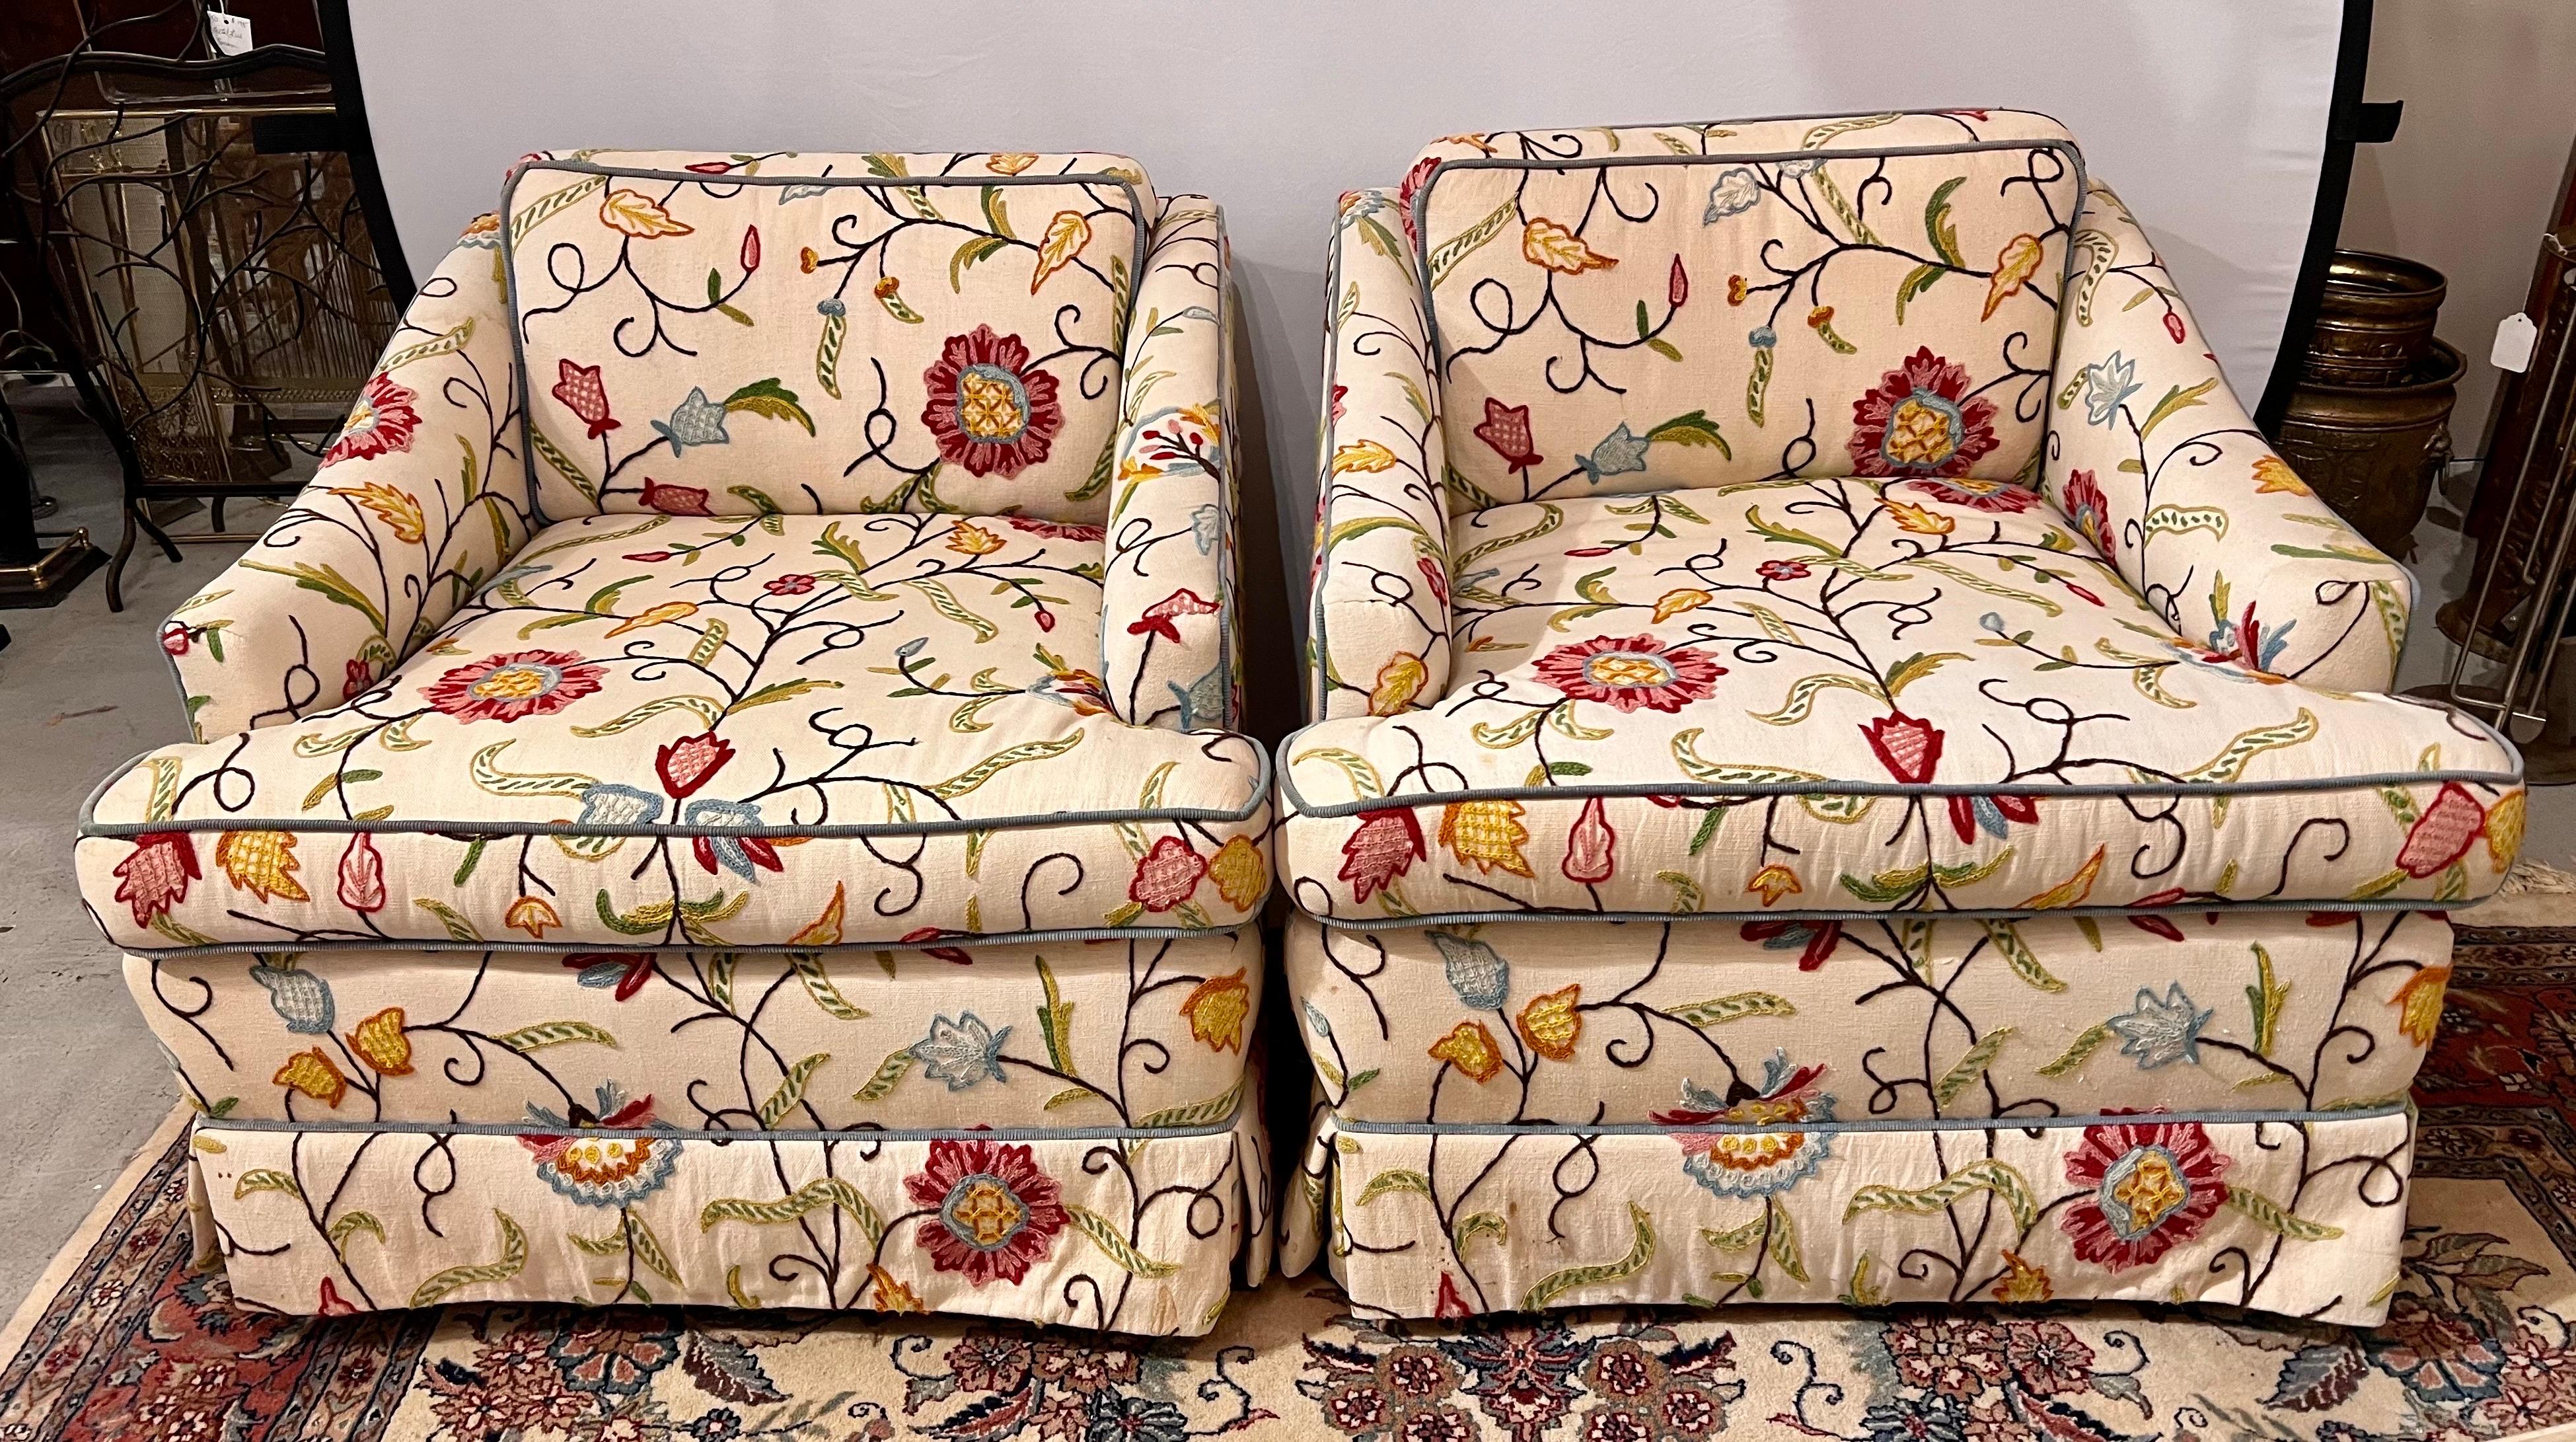 Chinoiserie Pair of Upholstered Club Chairs on Castors in Floral Crewel Work